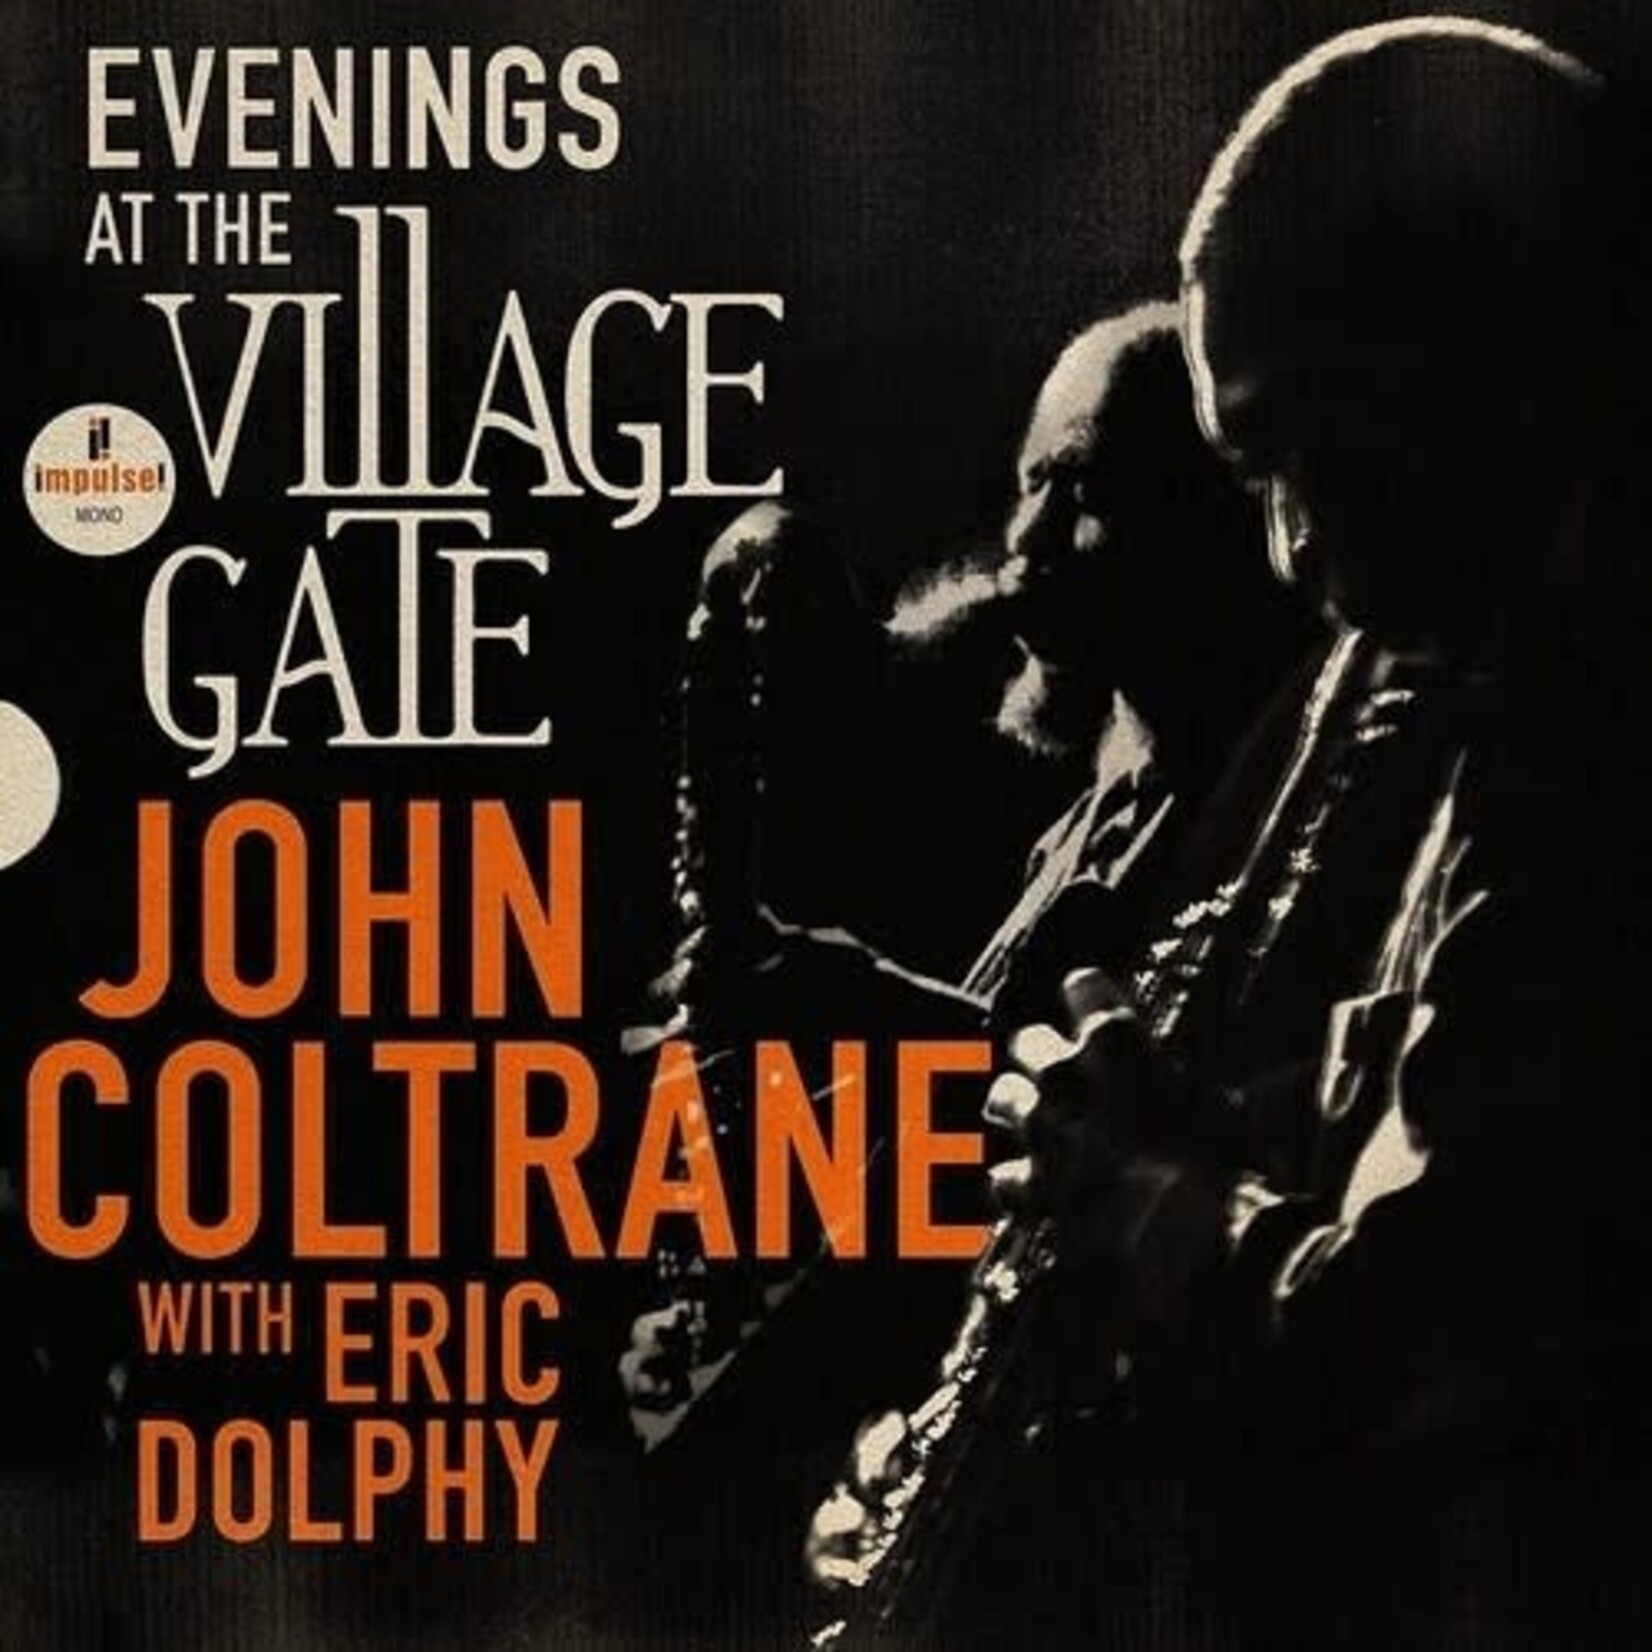 Impulse! John Coltrane with Eric Dolphy - Evenings At The Village Gate (2LP)